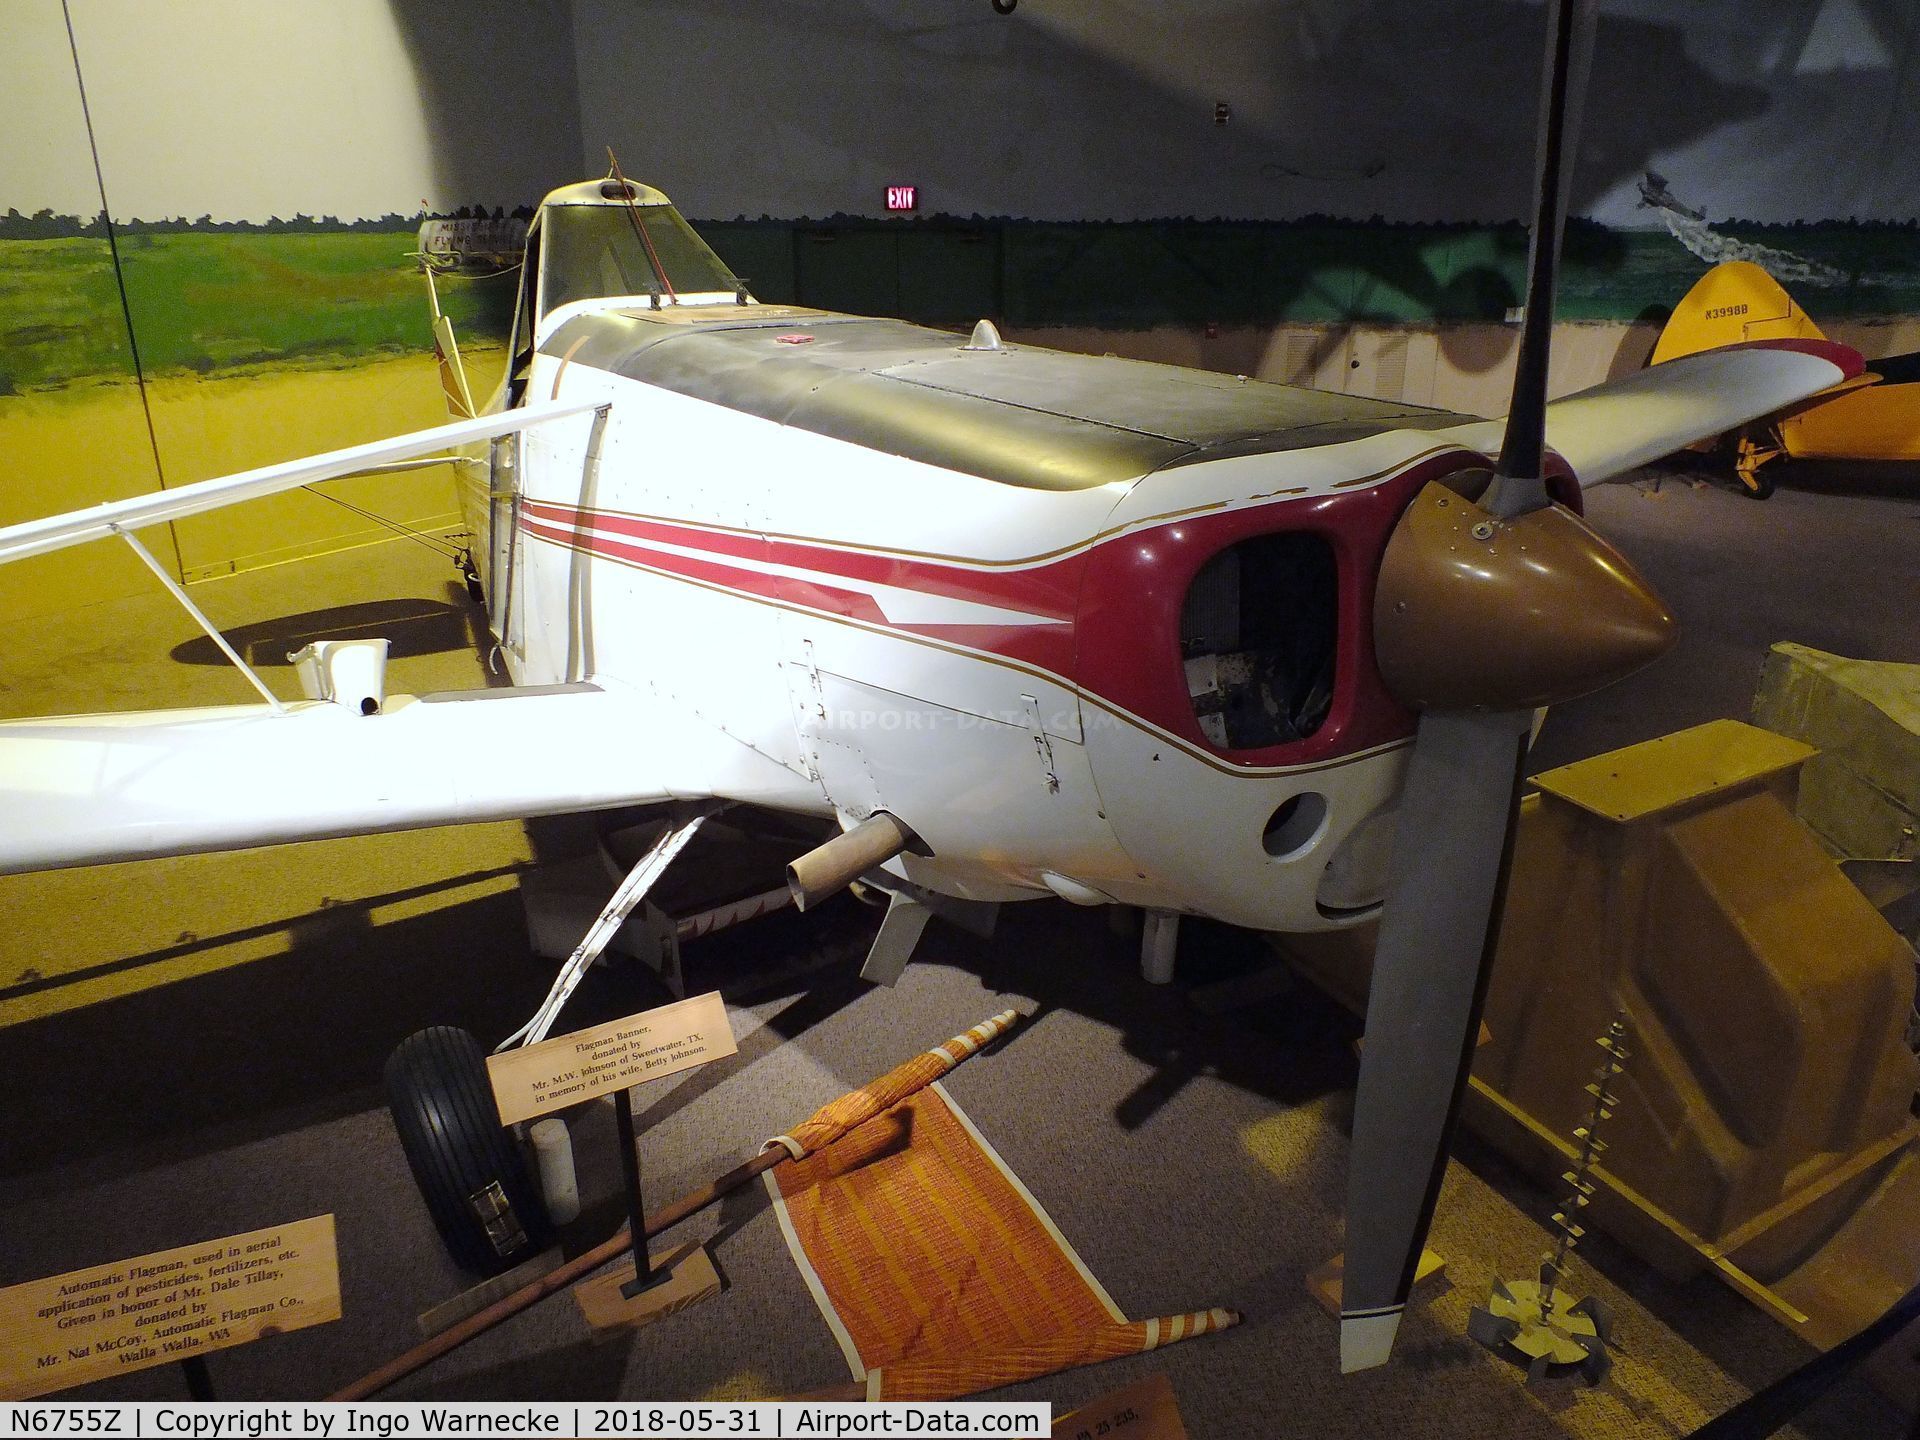 N6755Z, 1963 Piper PA-25-235 C/N 25-2375, Piper PA-25-235 Pawnee at the Mississippi Agriculture & Forestry Museum, Jackson MS